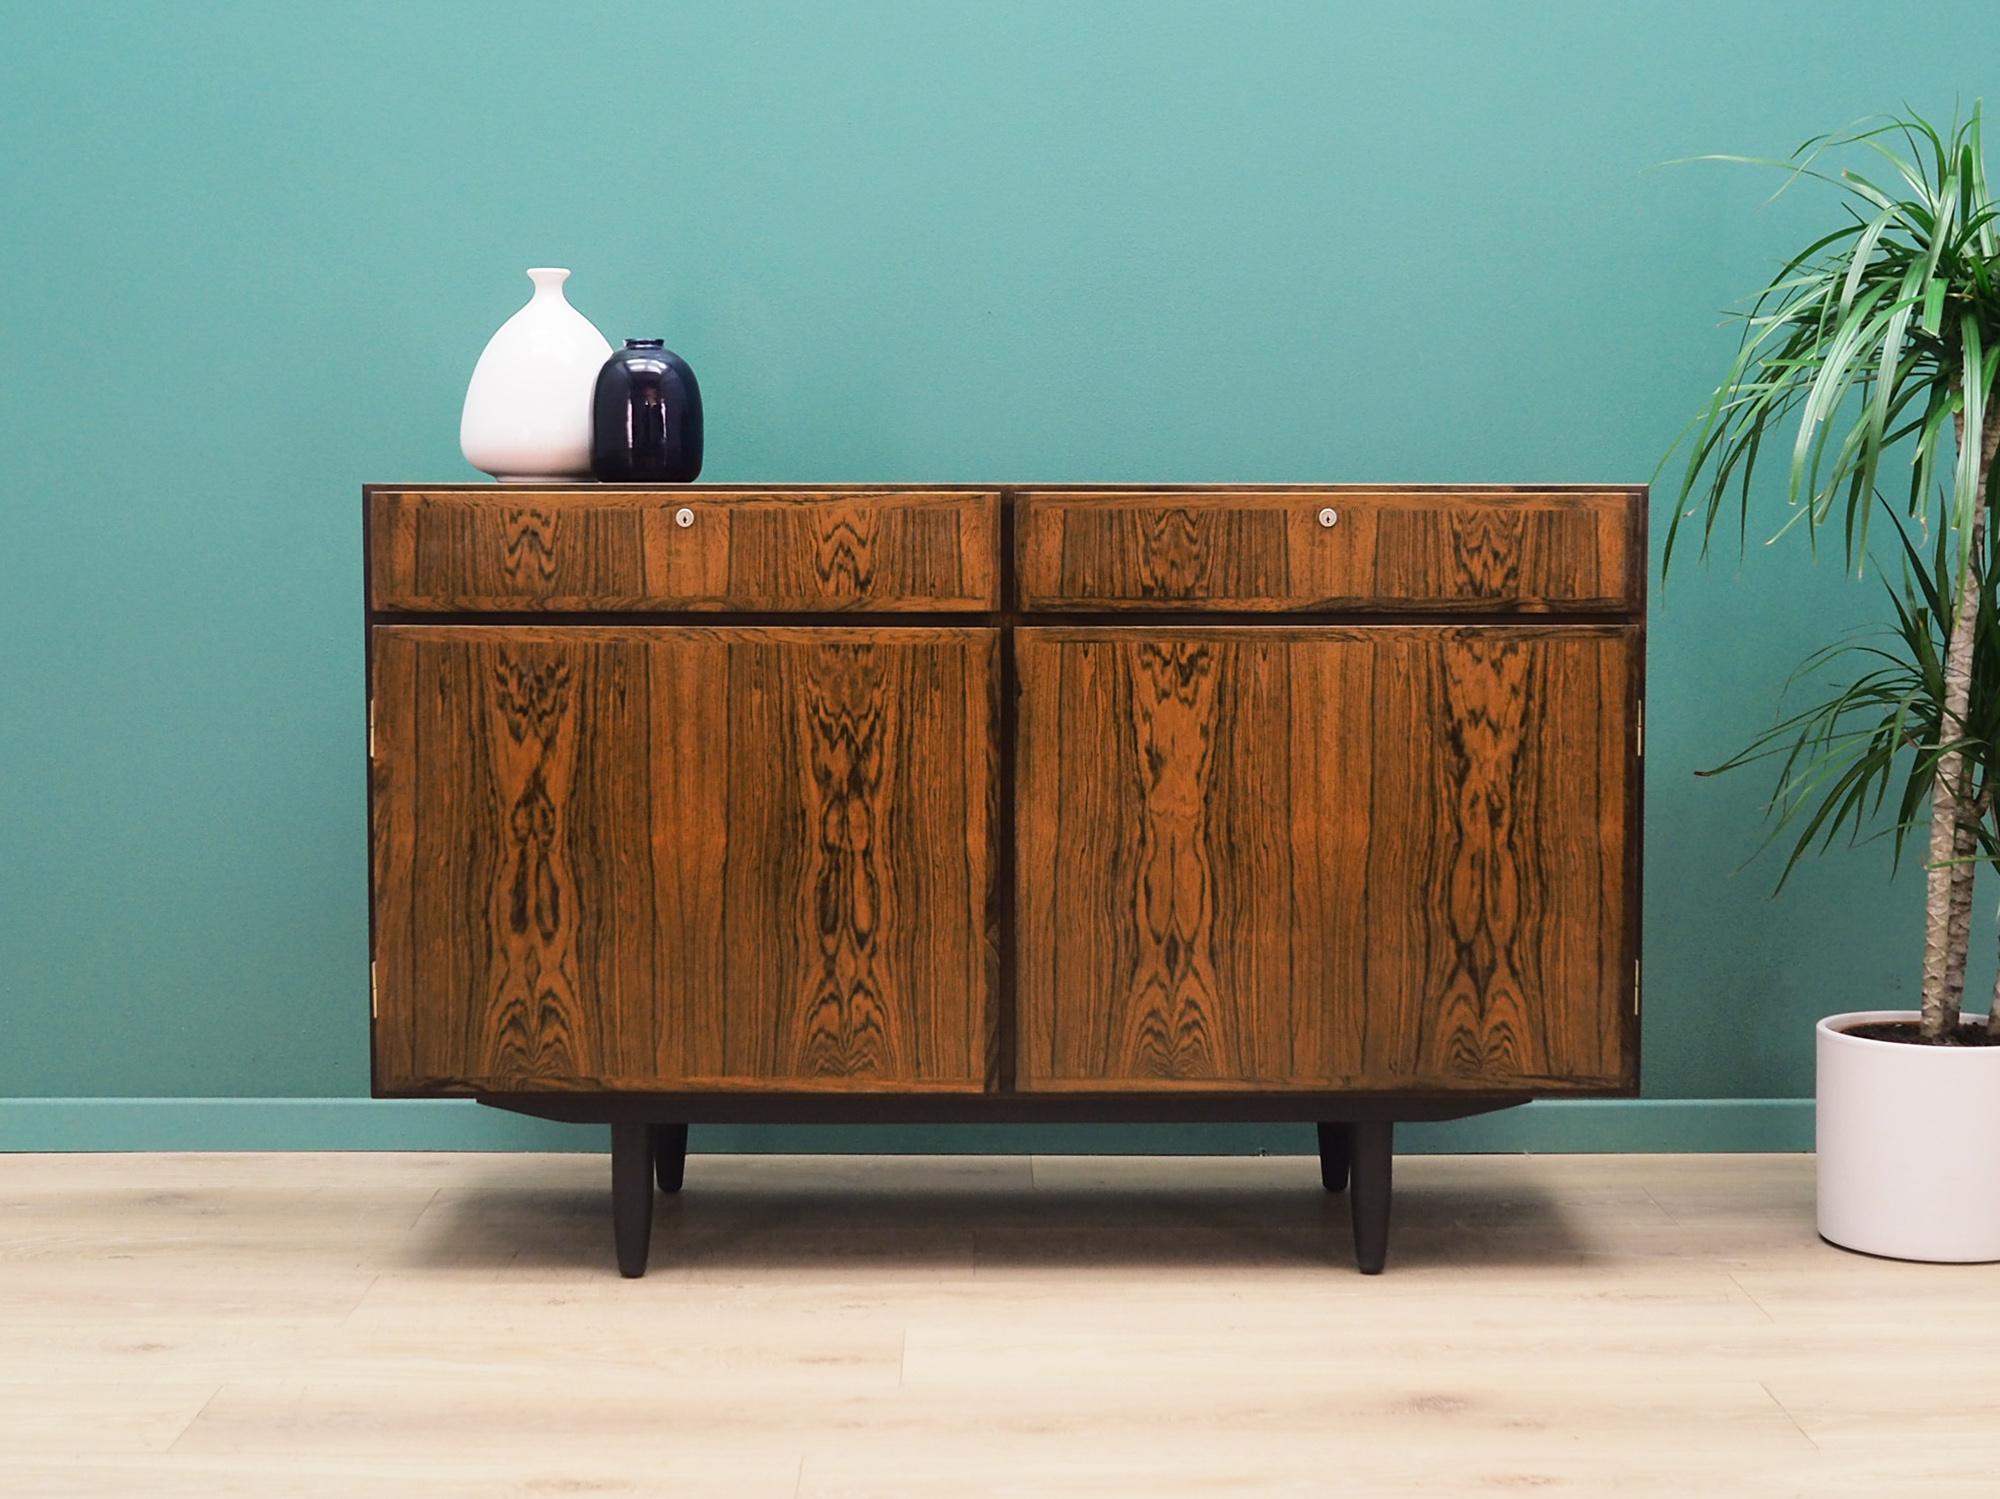 Cabinet was made in the 1960s and was produced by the well-known Danish manufactory Omann Jun.

The construction is covered with rosewood veneer. Legs made of solid wood stained black. The surface after refreshing. Inside the space has been filled